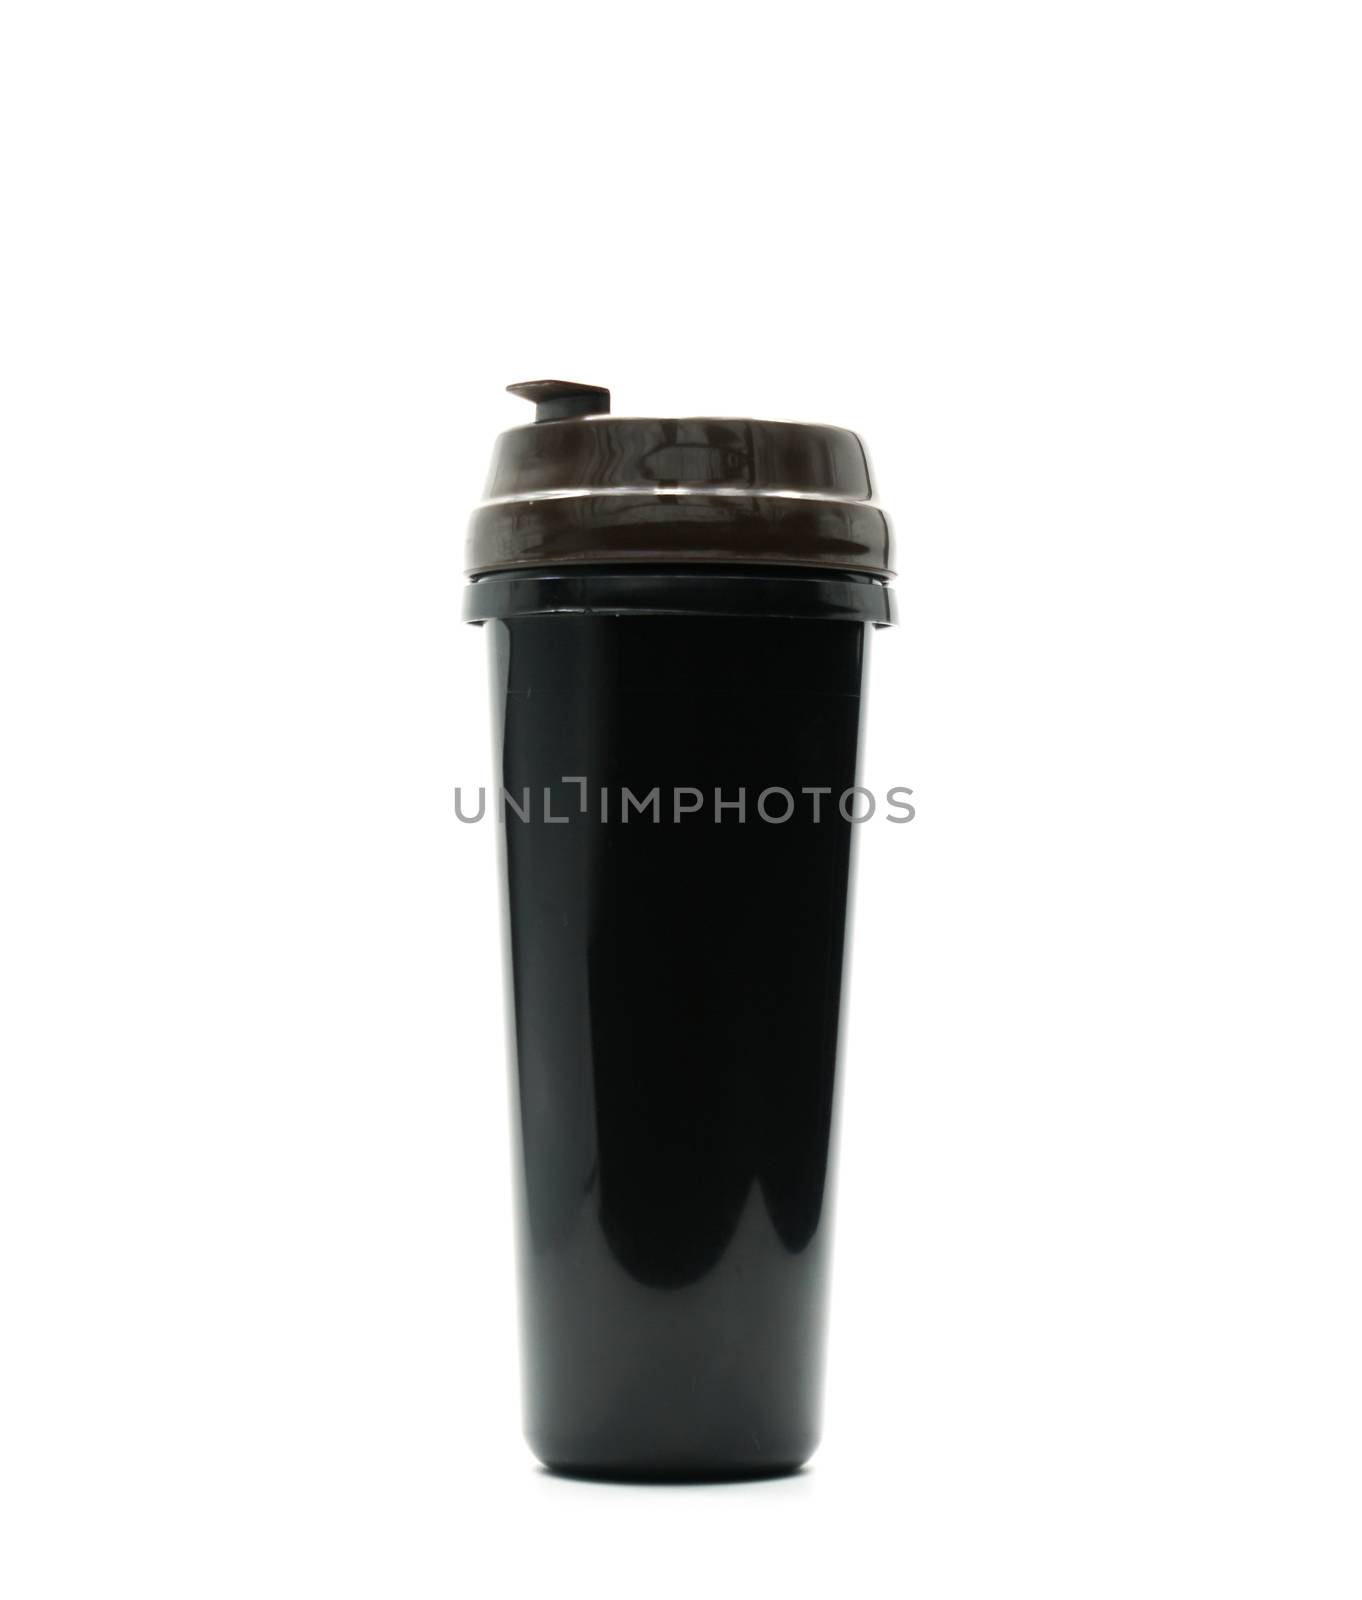 Black thermos bottle isolated on white background, just add your own text